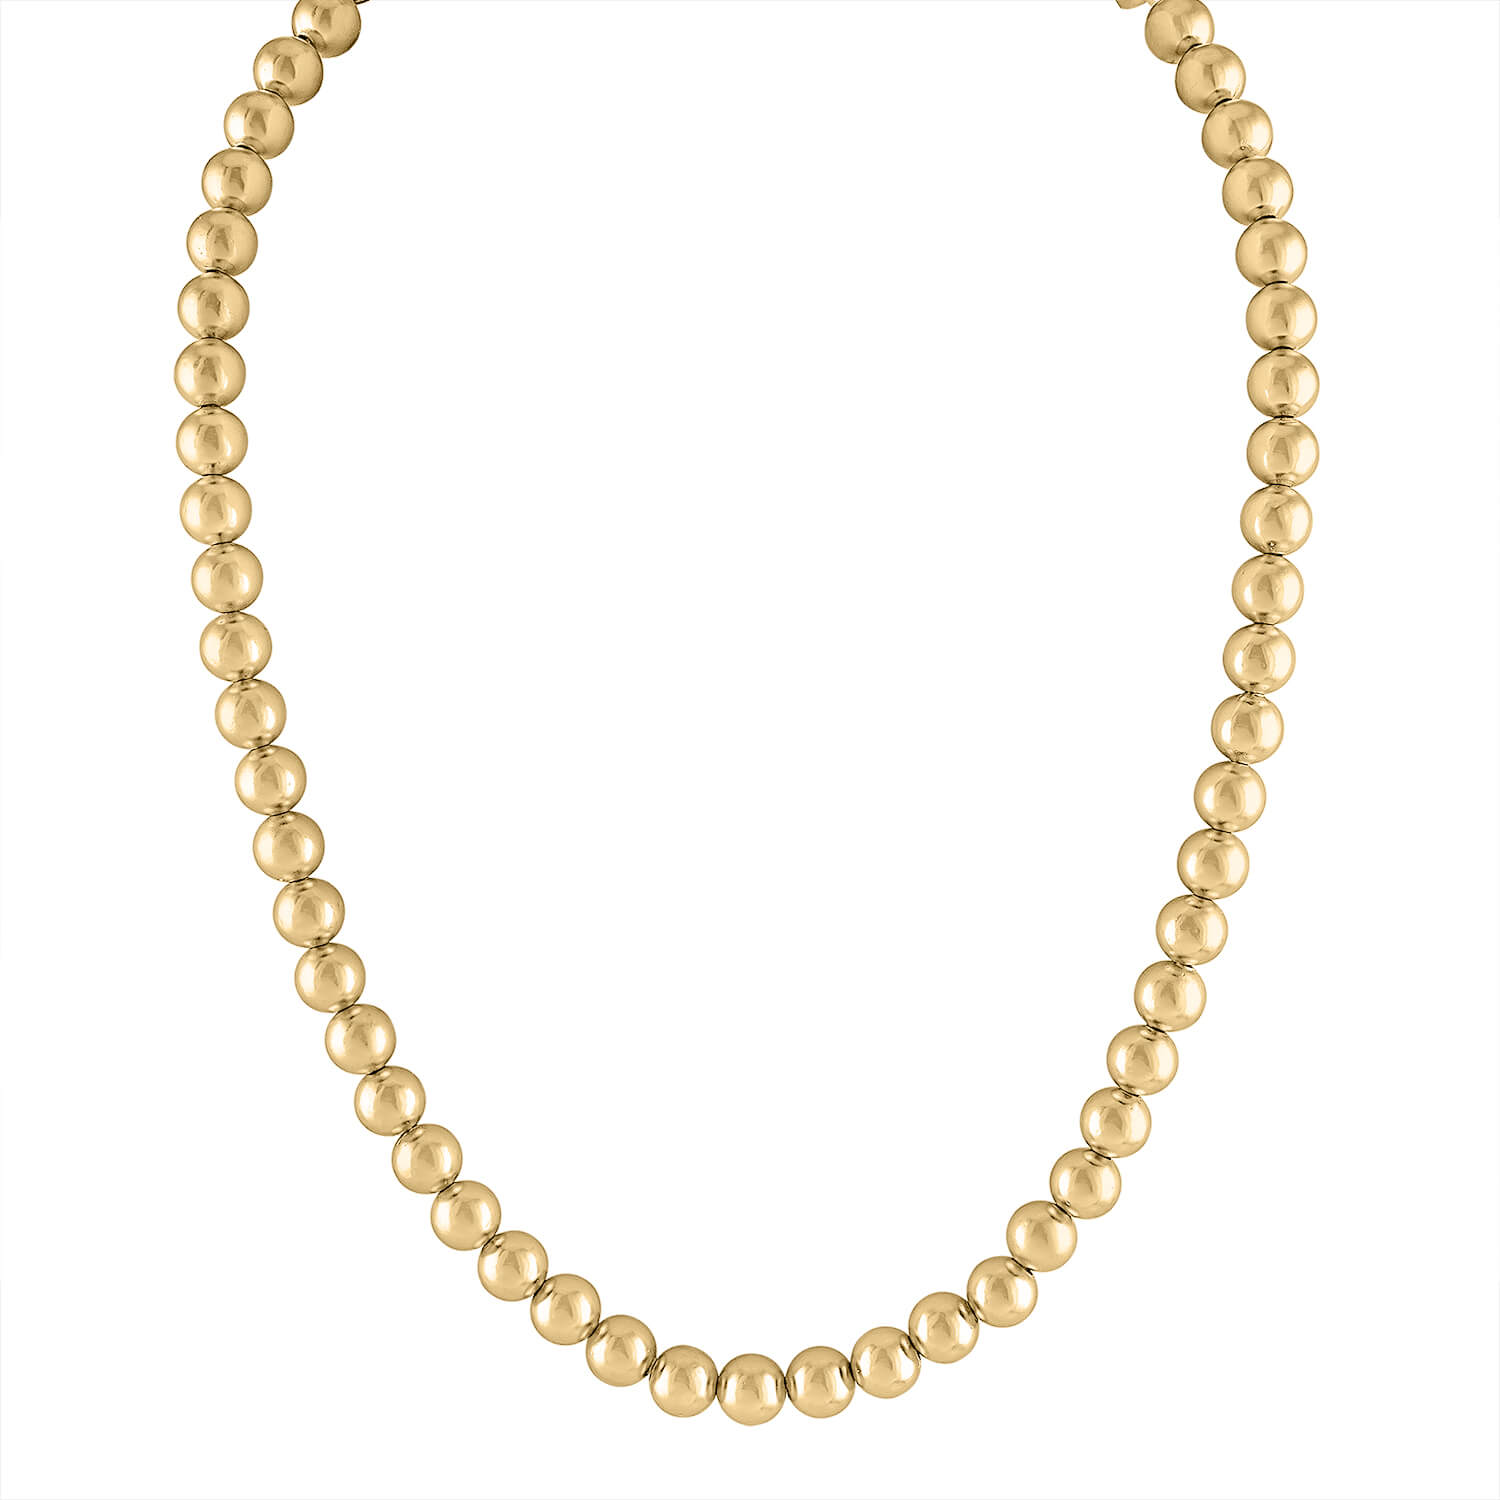 Industrial Pearl Necklace in Gold